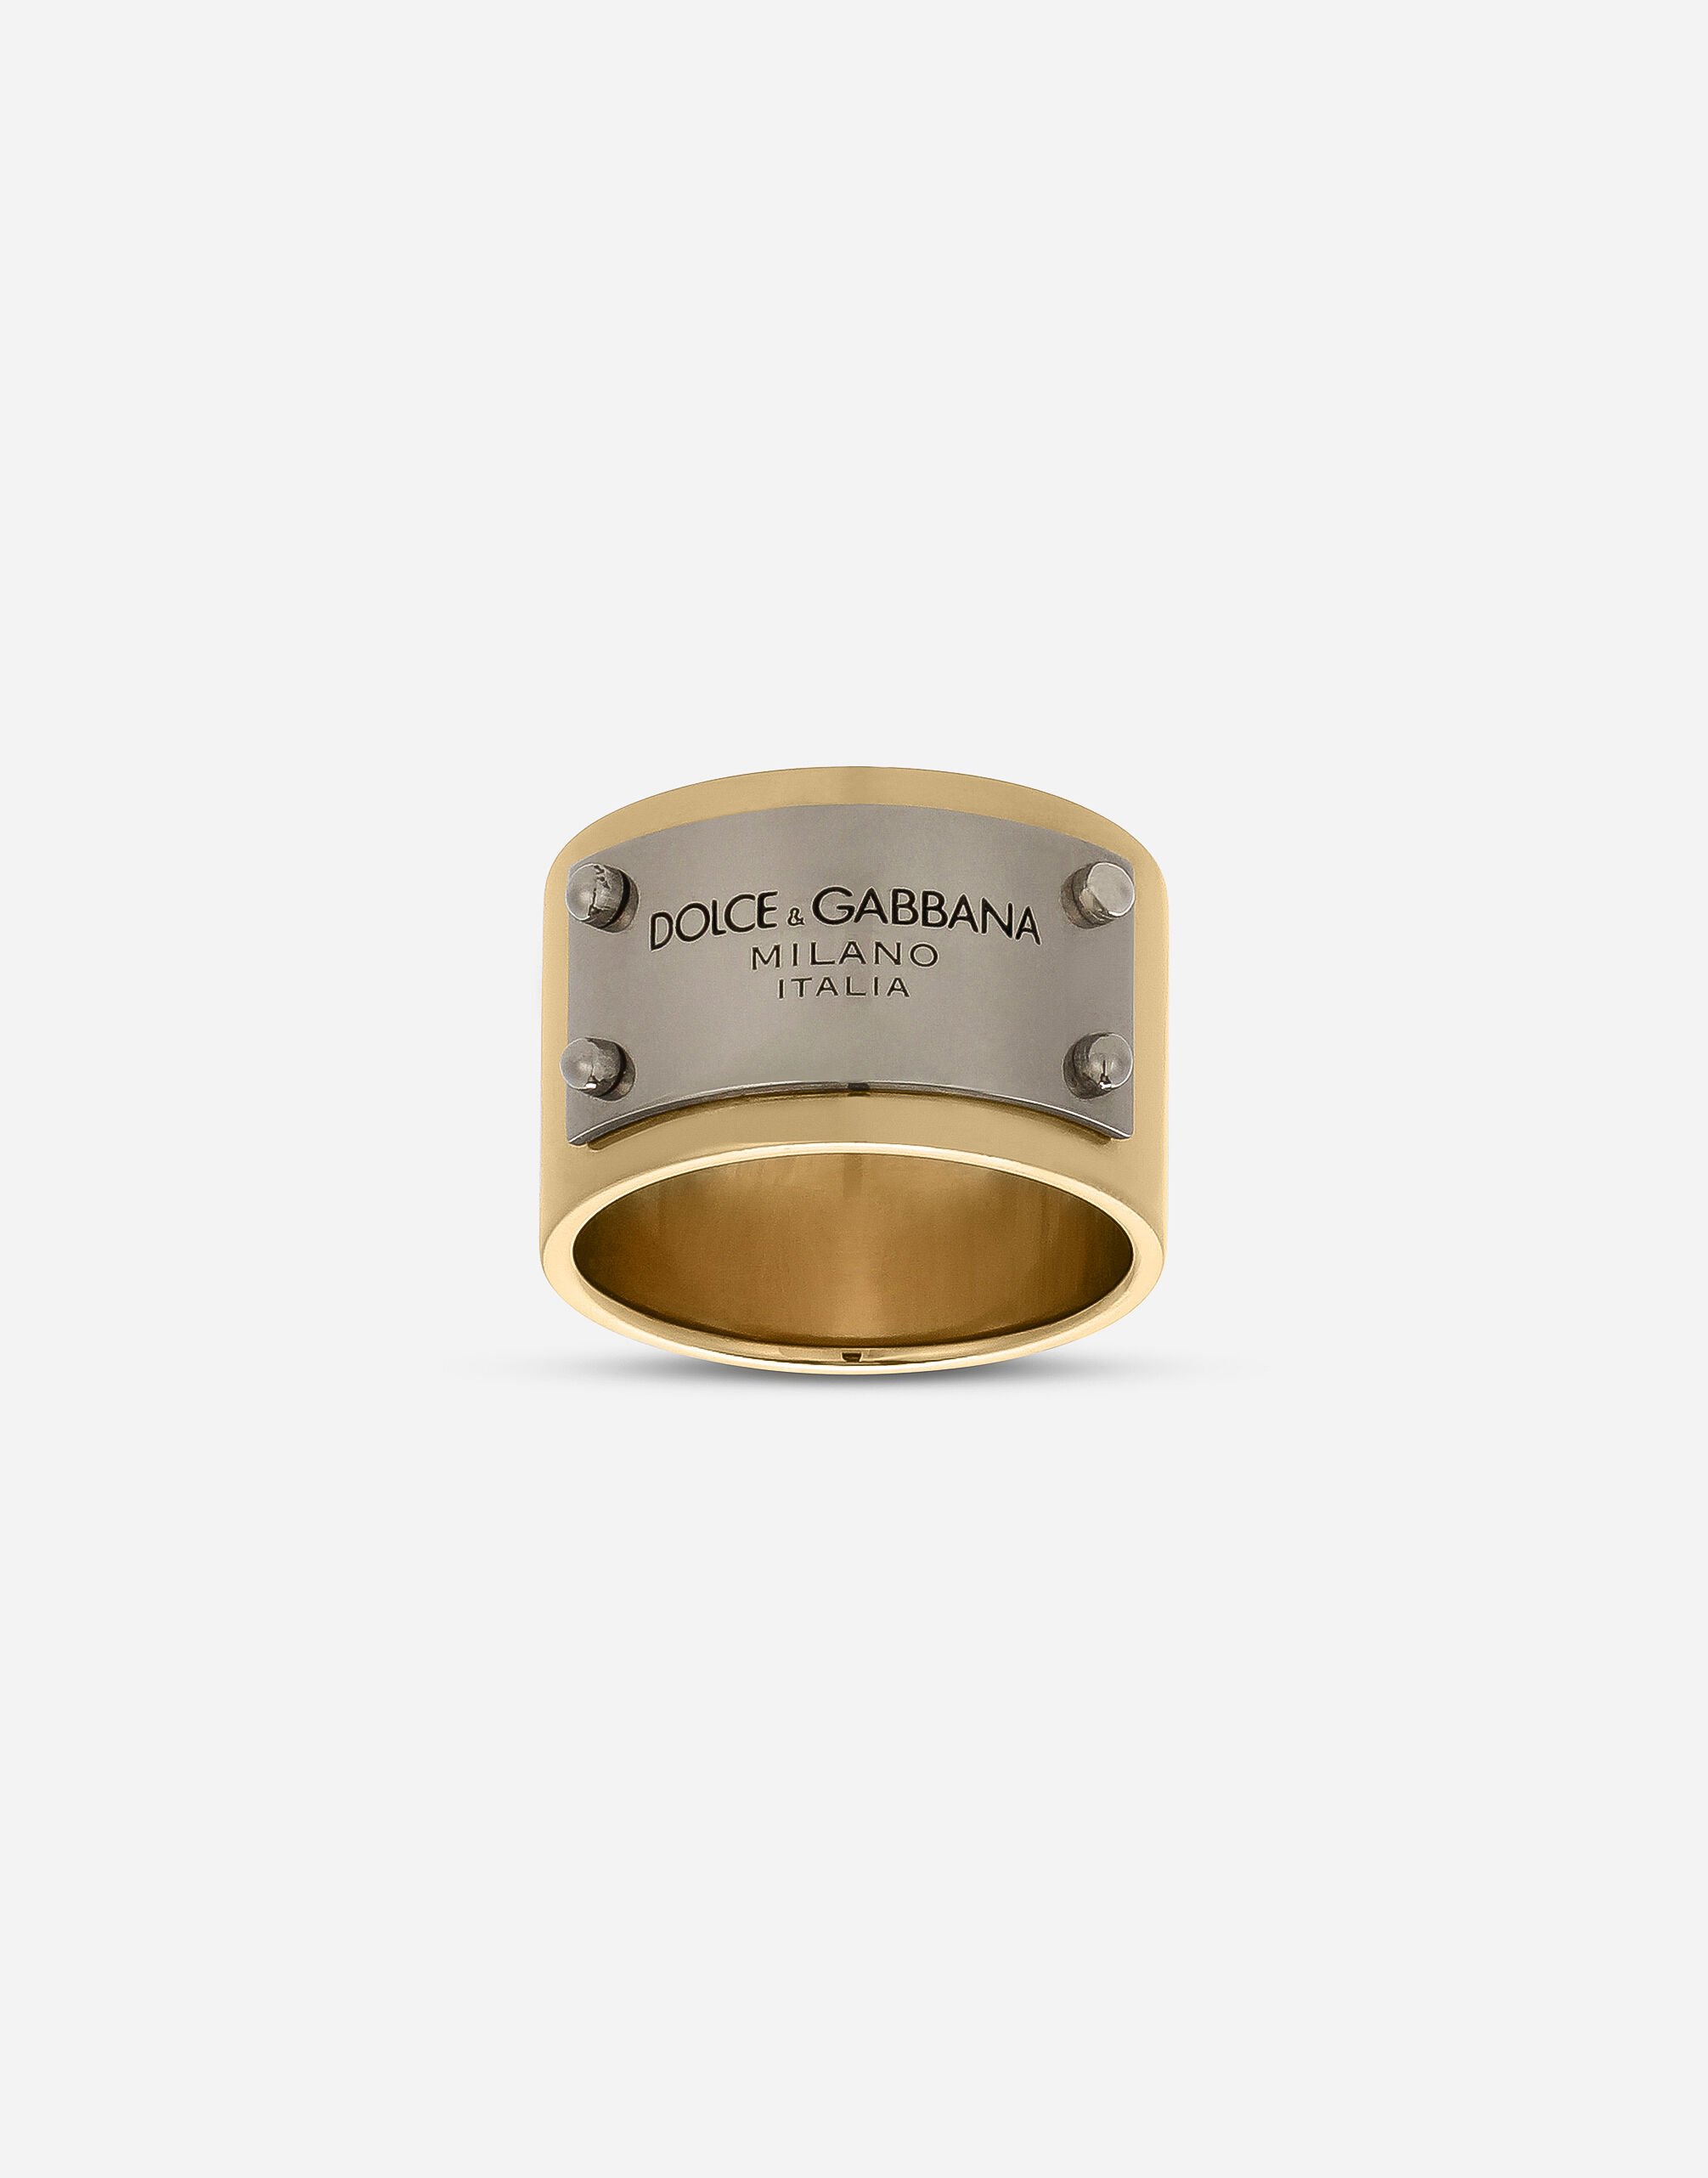 Dolce & Gabbana Ring with Dolce&Gabbana tag Gold WPP1T1W1111